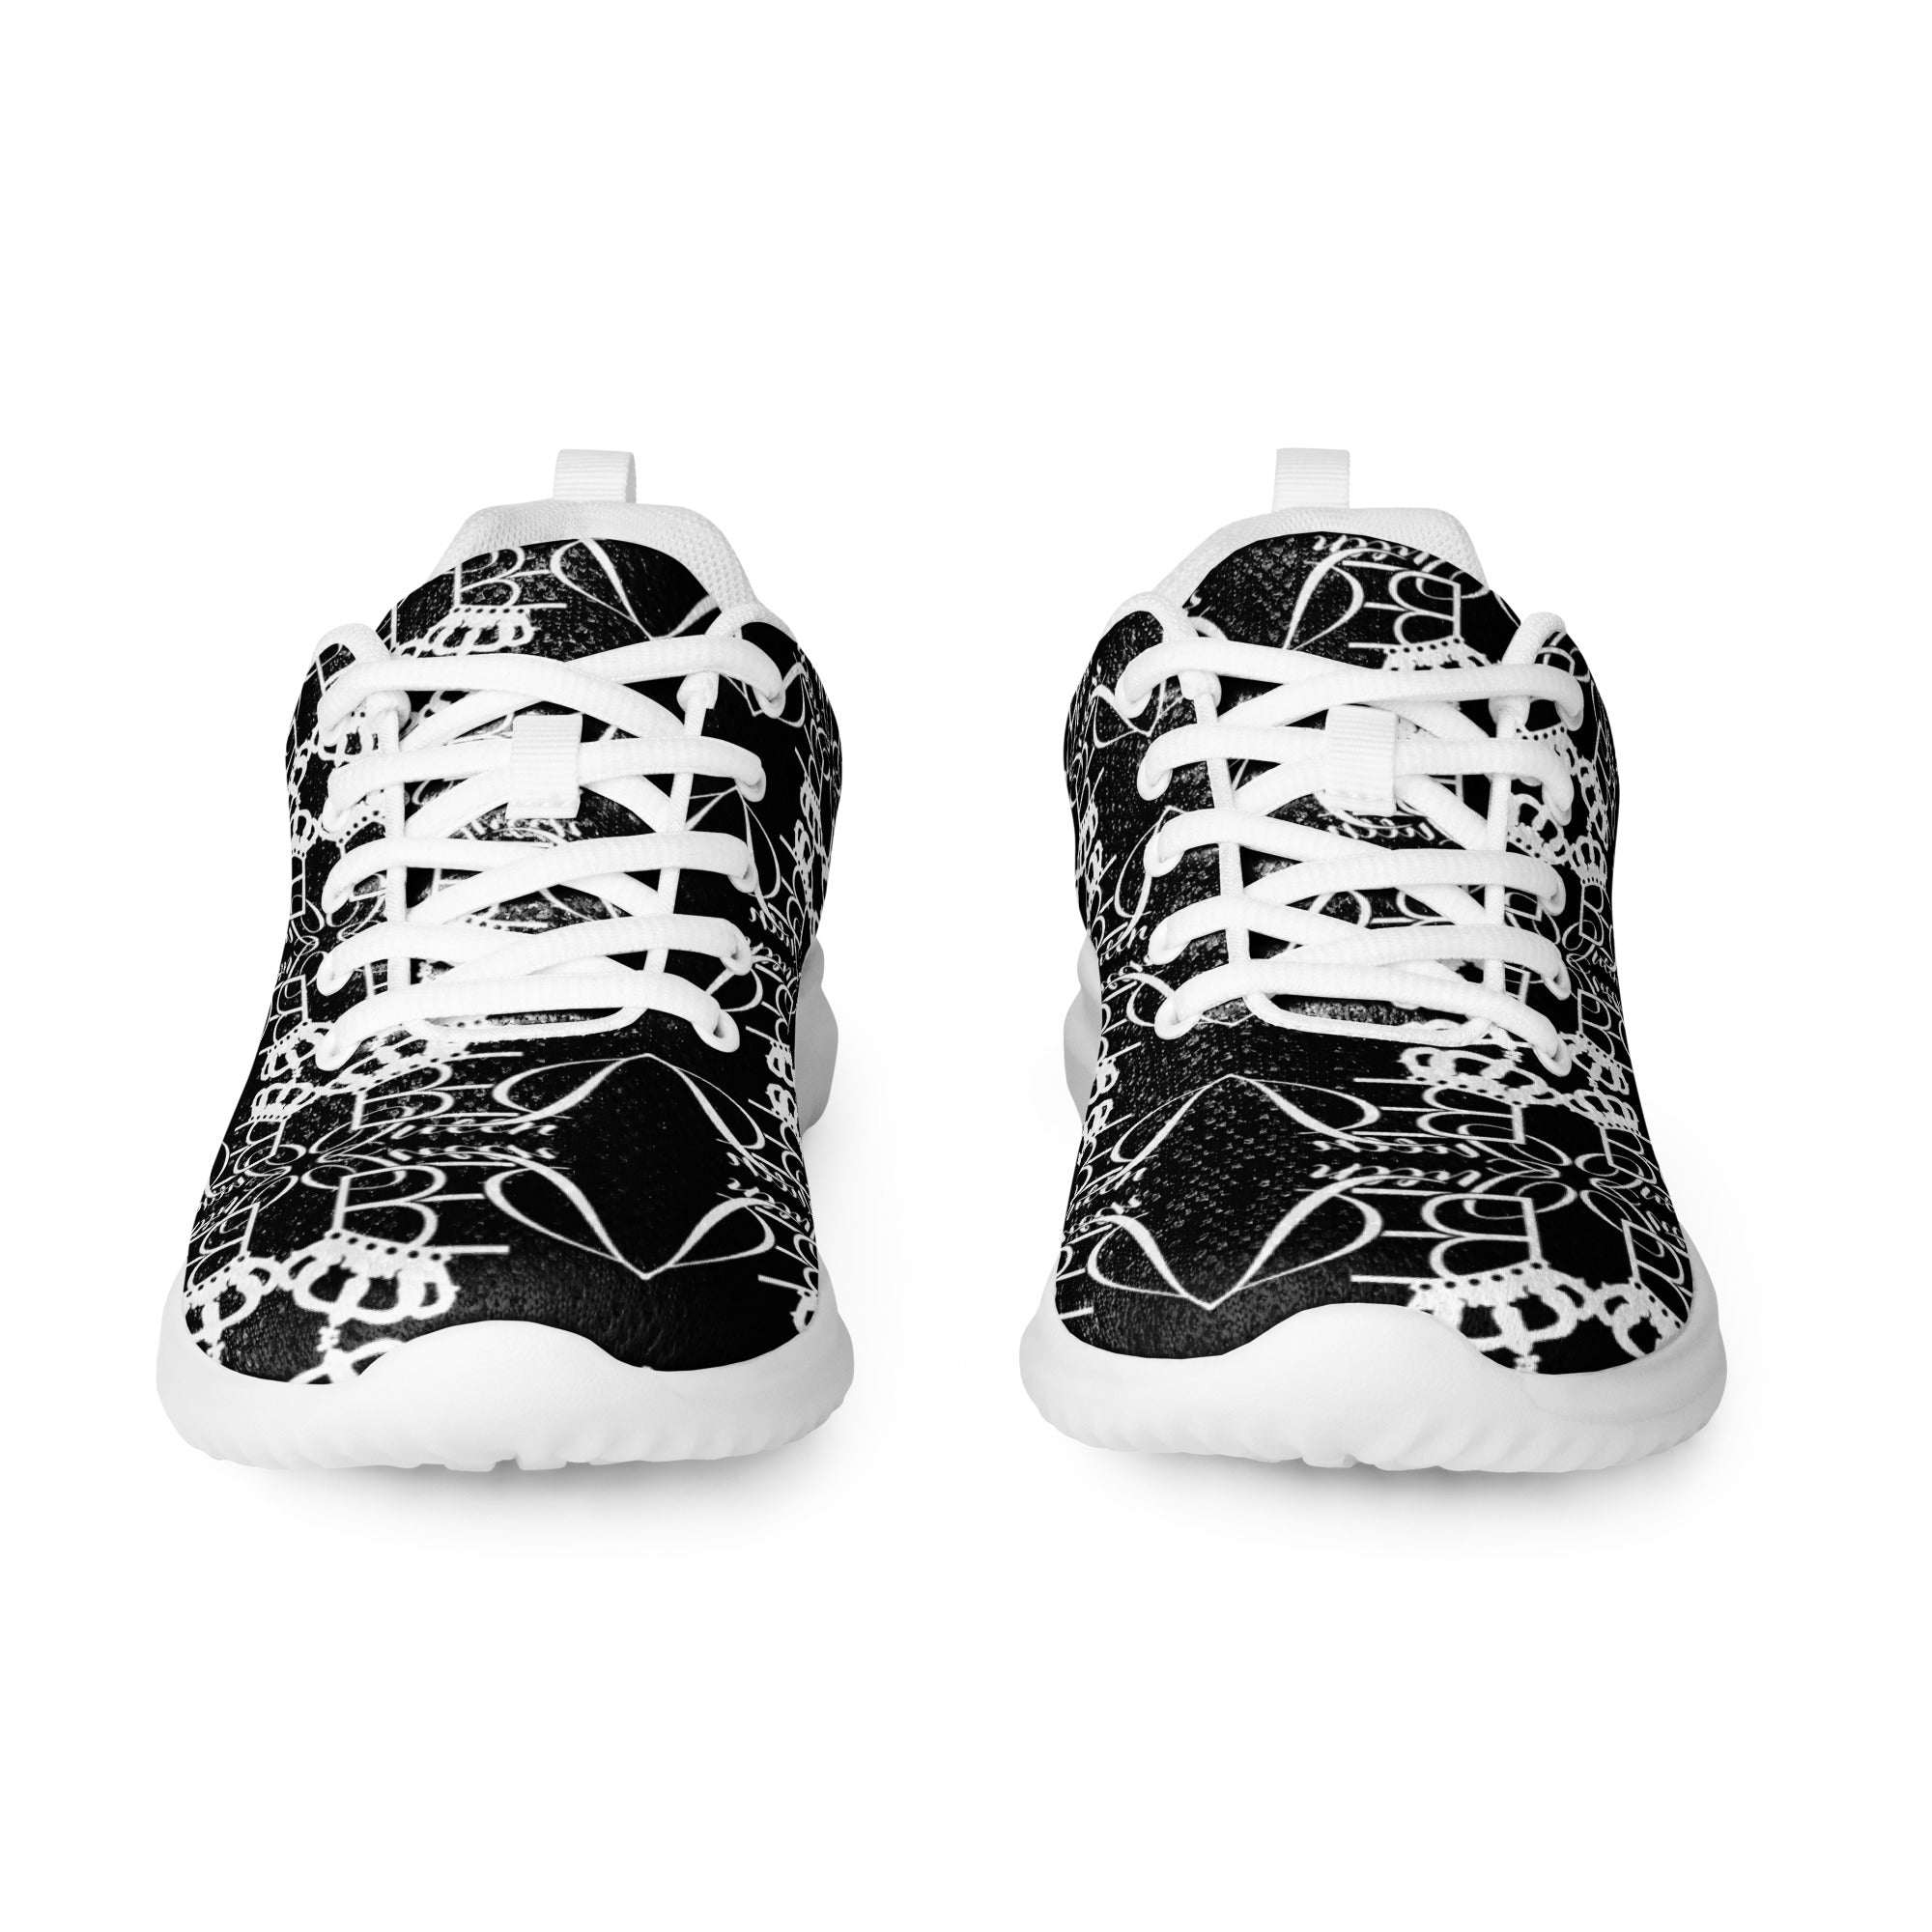 *NEW* "BEI" QUEEN#1 Athletic Shoes_BL